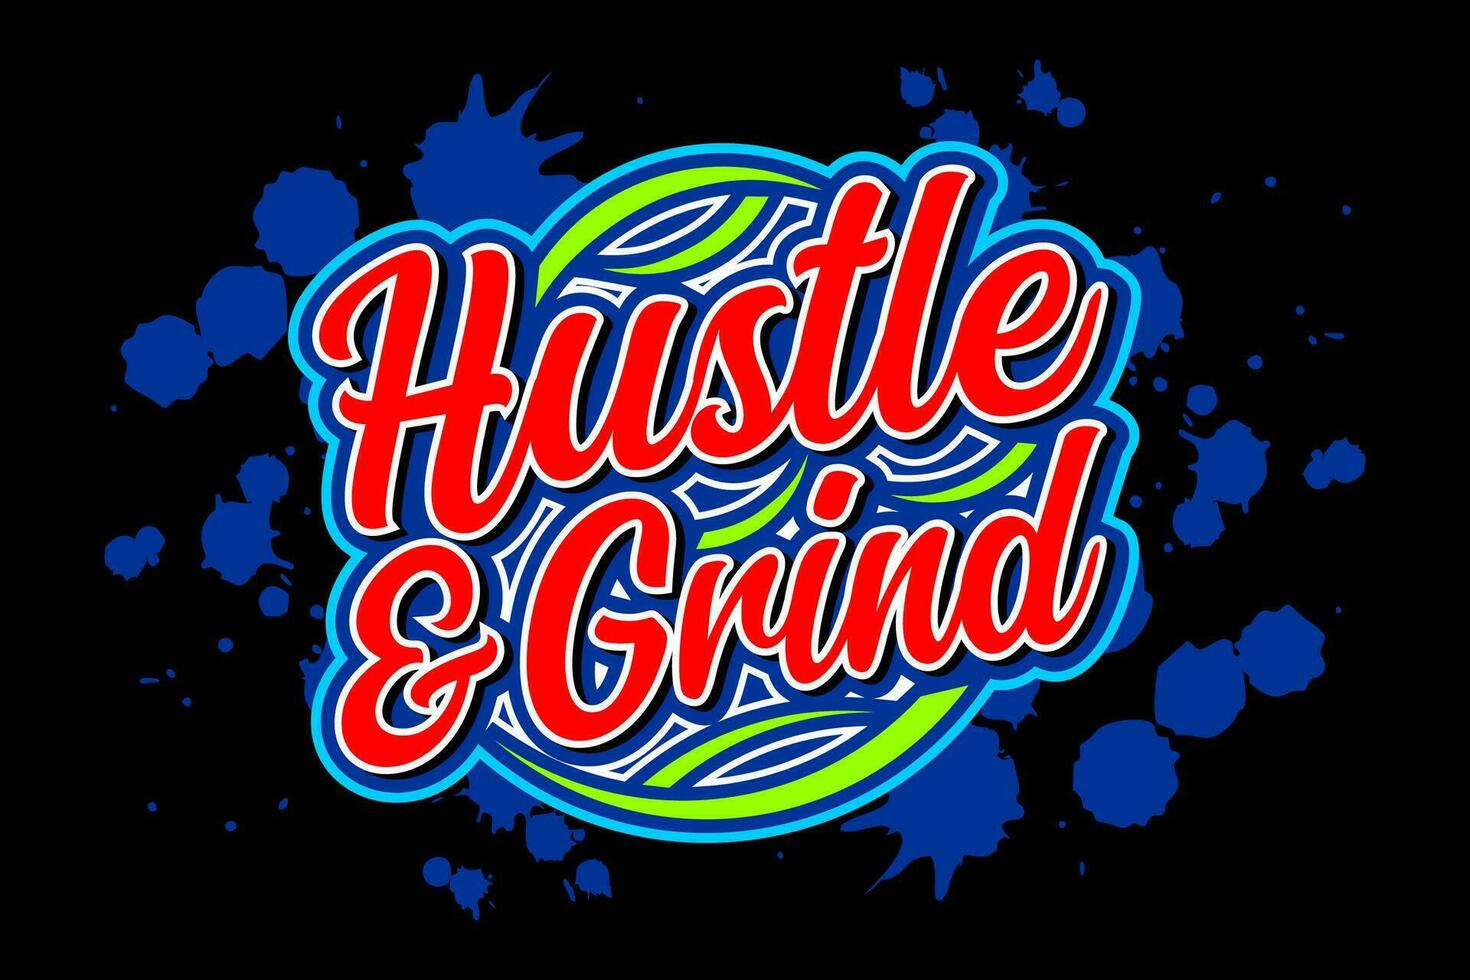 Hustle and grid typgraphy slogan, for t-shirt, posters, labels, etc. vector